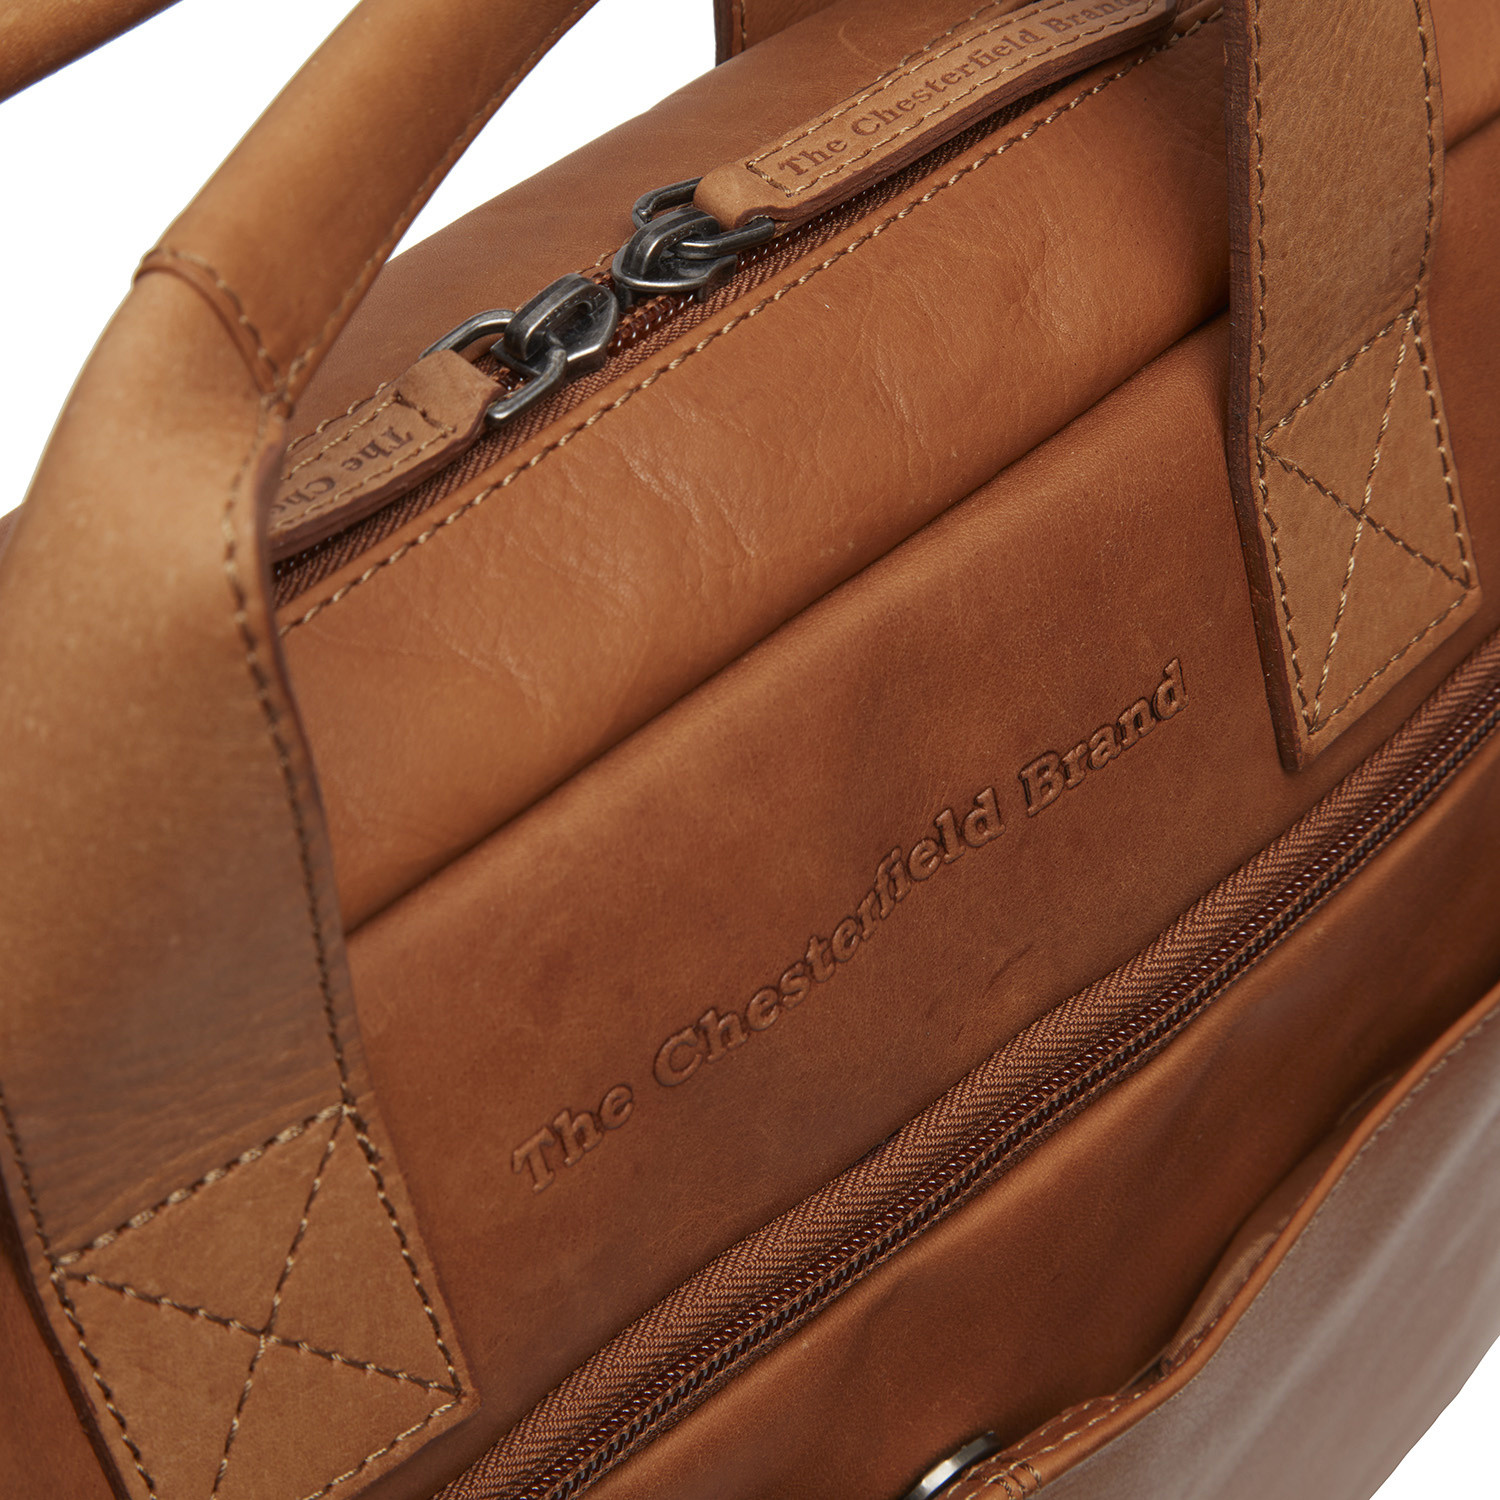 Leather Laptop Bag  Shop The Chesterfield Brand for Laptop Bags - The  Chesterfield Brand